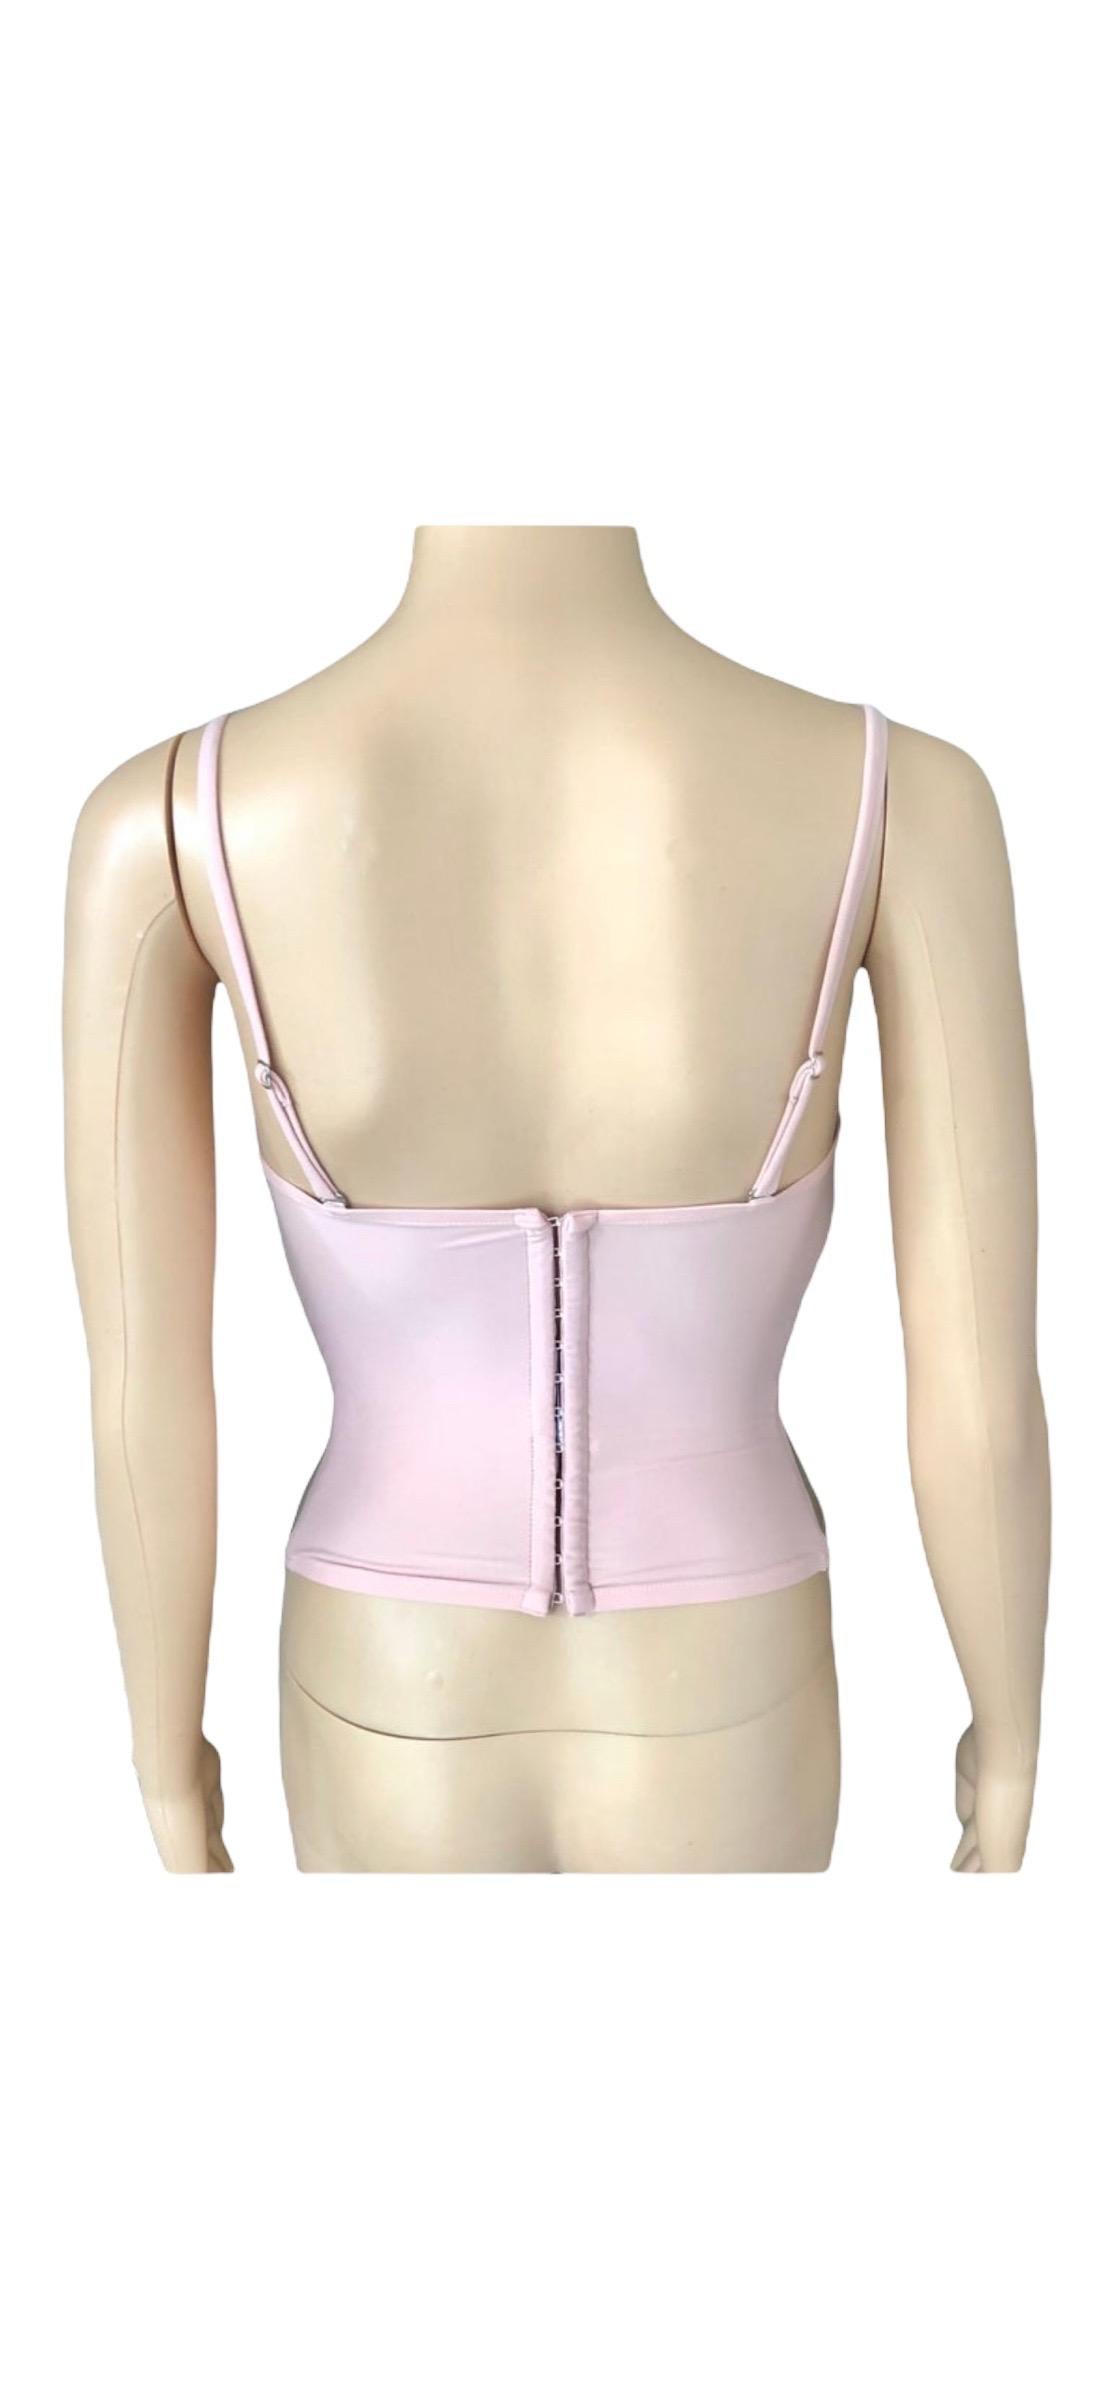 Christian Dior By John Galliano S/S 2006 Unworn Bustier Lace Corset Crop Top For Sale 6